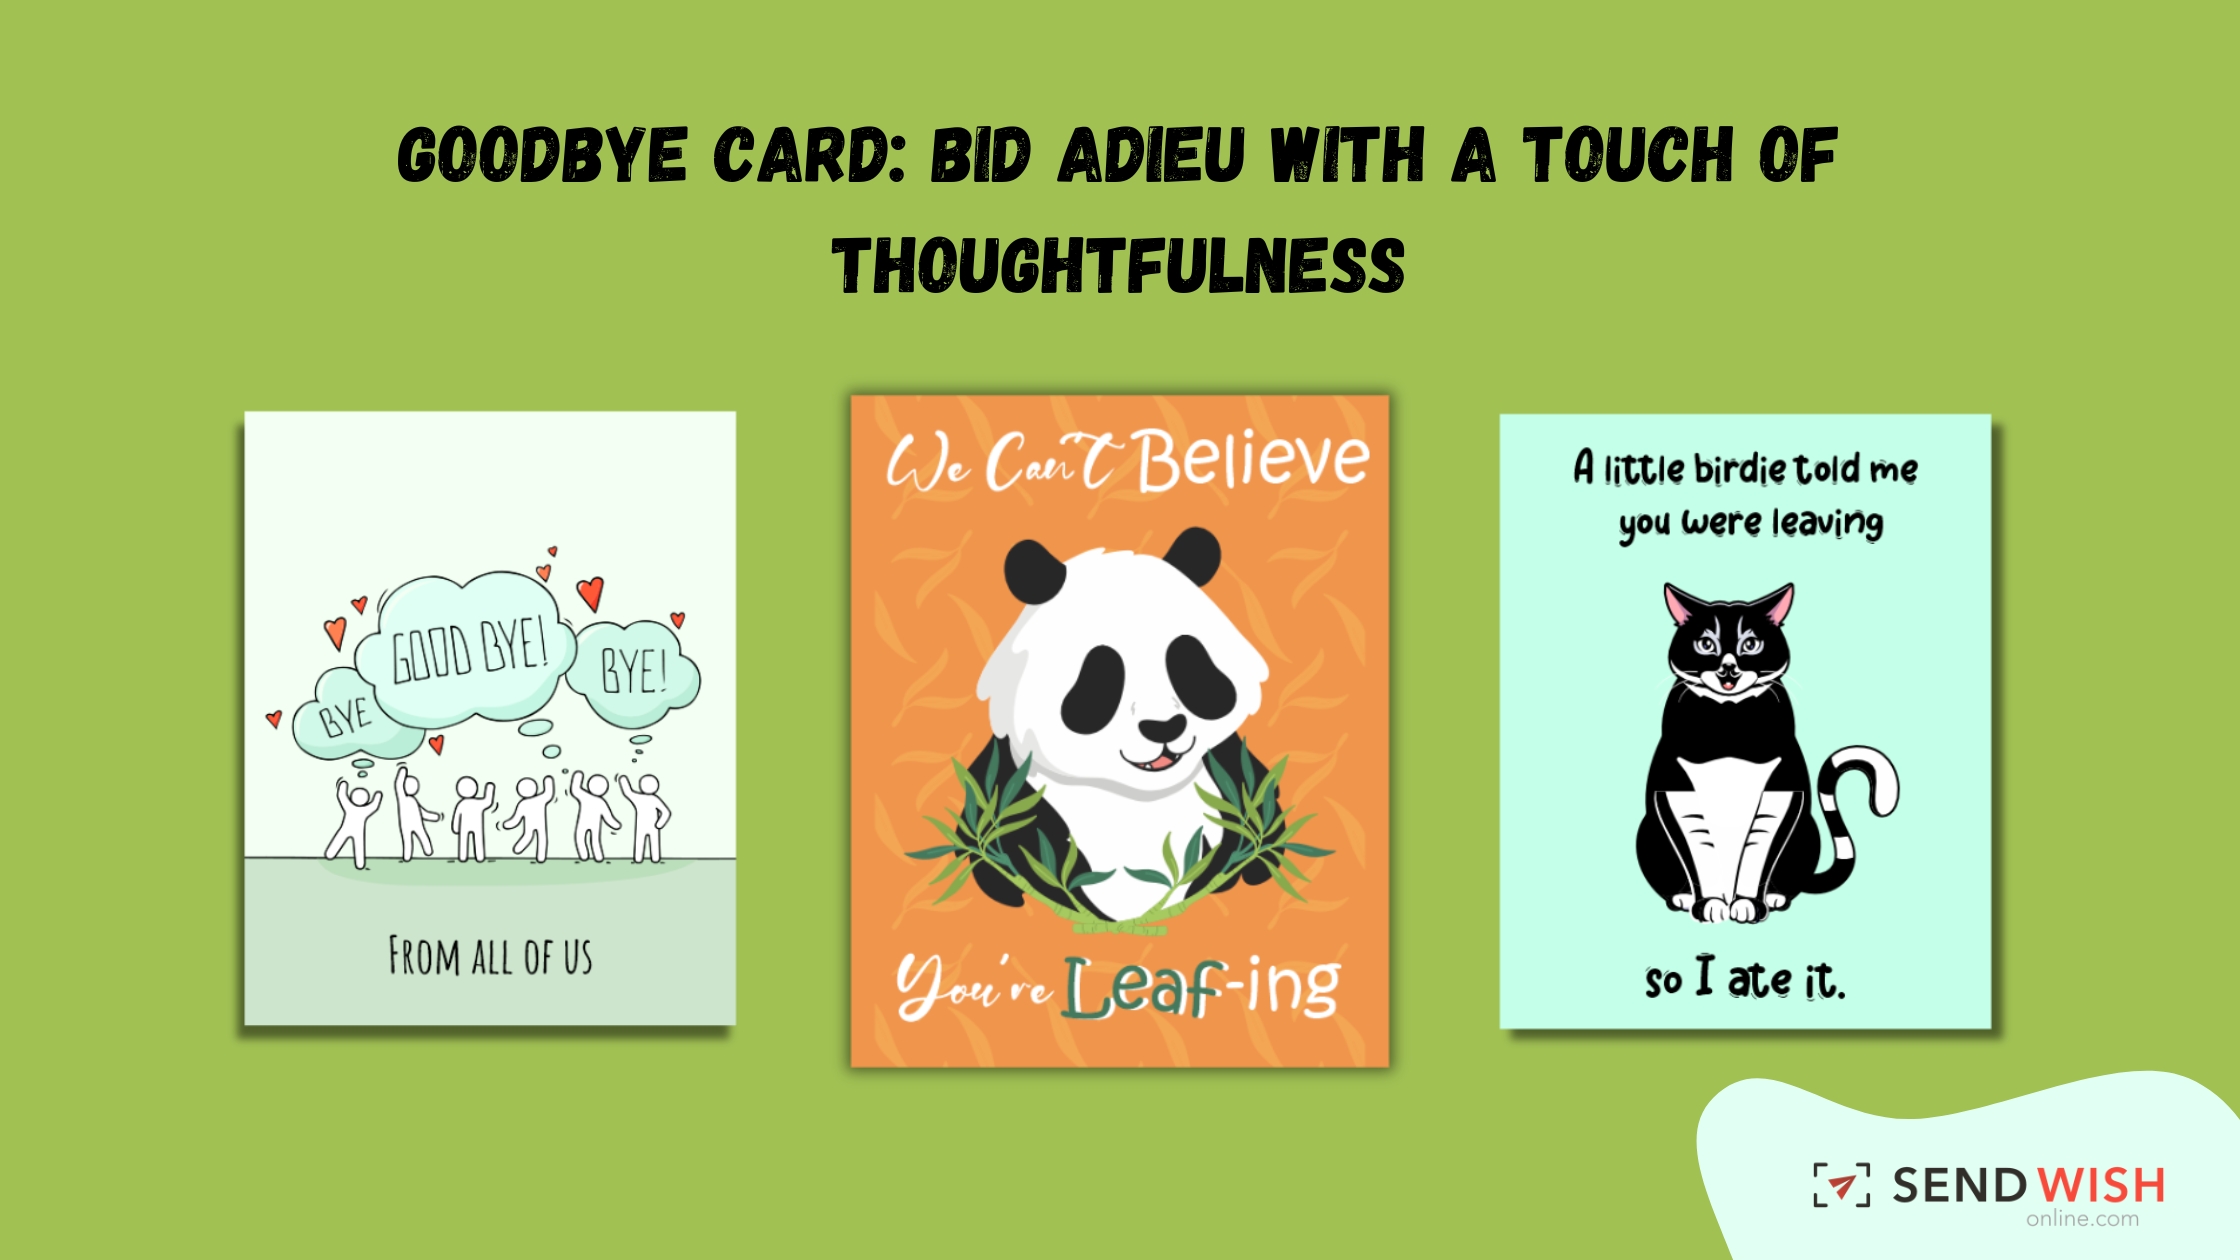 Farewell Cards Online: Personal Touch for Farewells